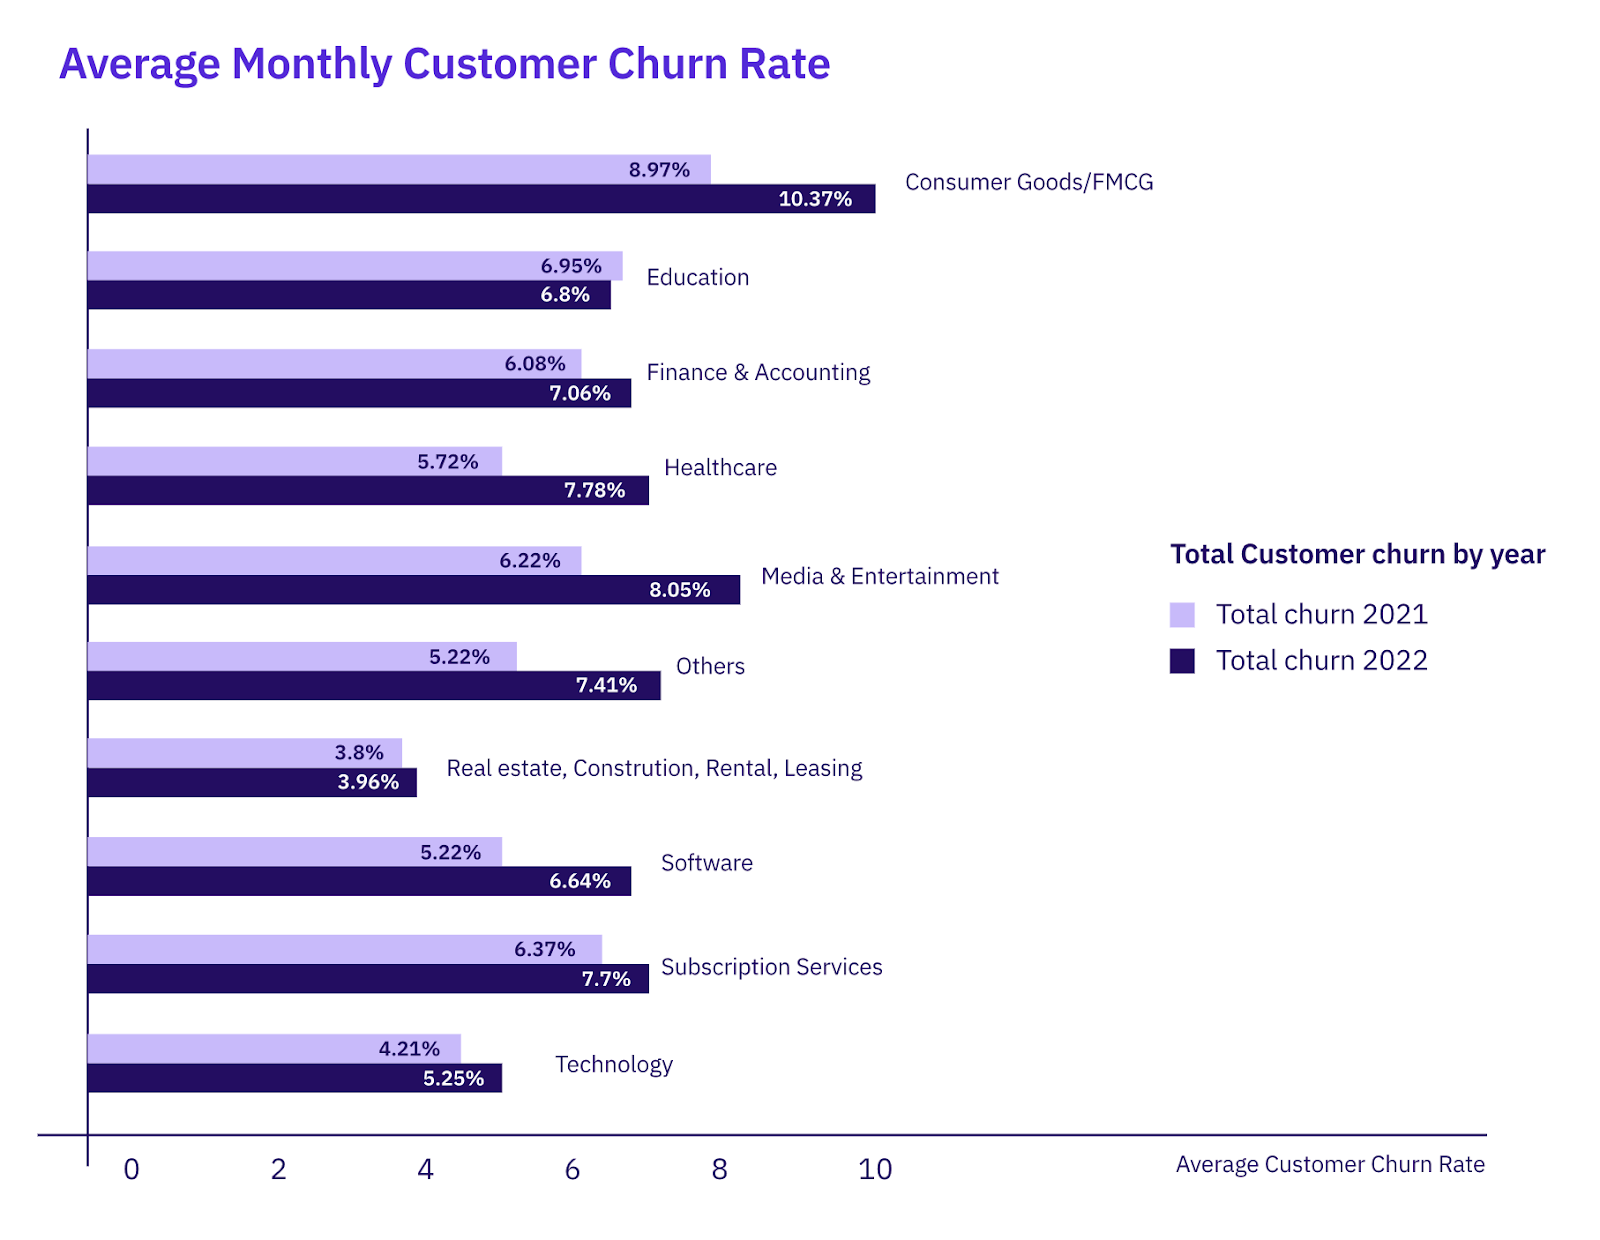 What's the average monthly churn rate per industry